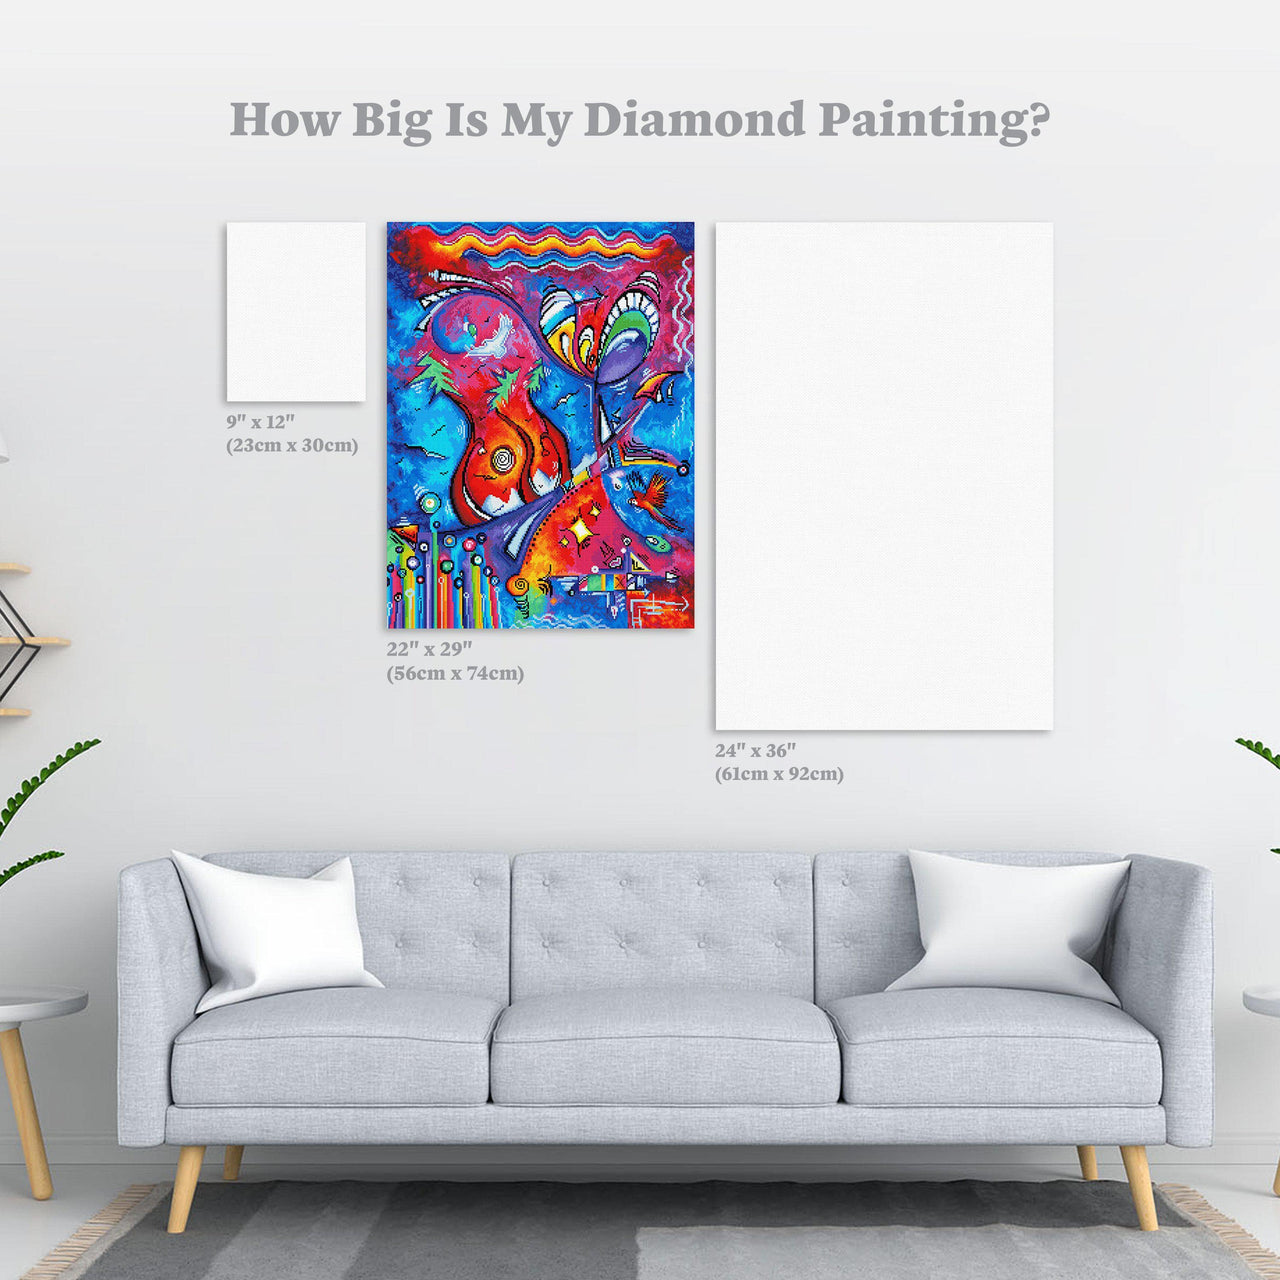 Diamond Painting Take Flight 22" x 29″ (56cm x 74cm) / Square with 56 Colors including 5 ABs / 64,532